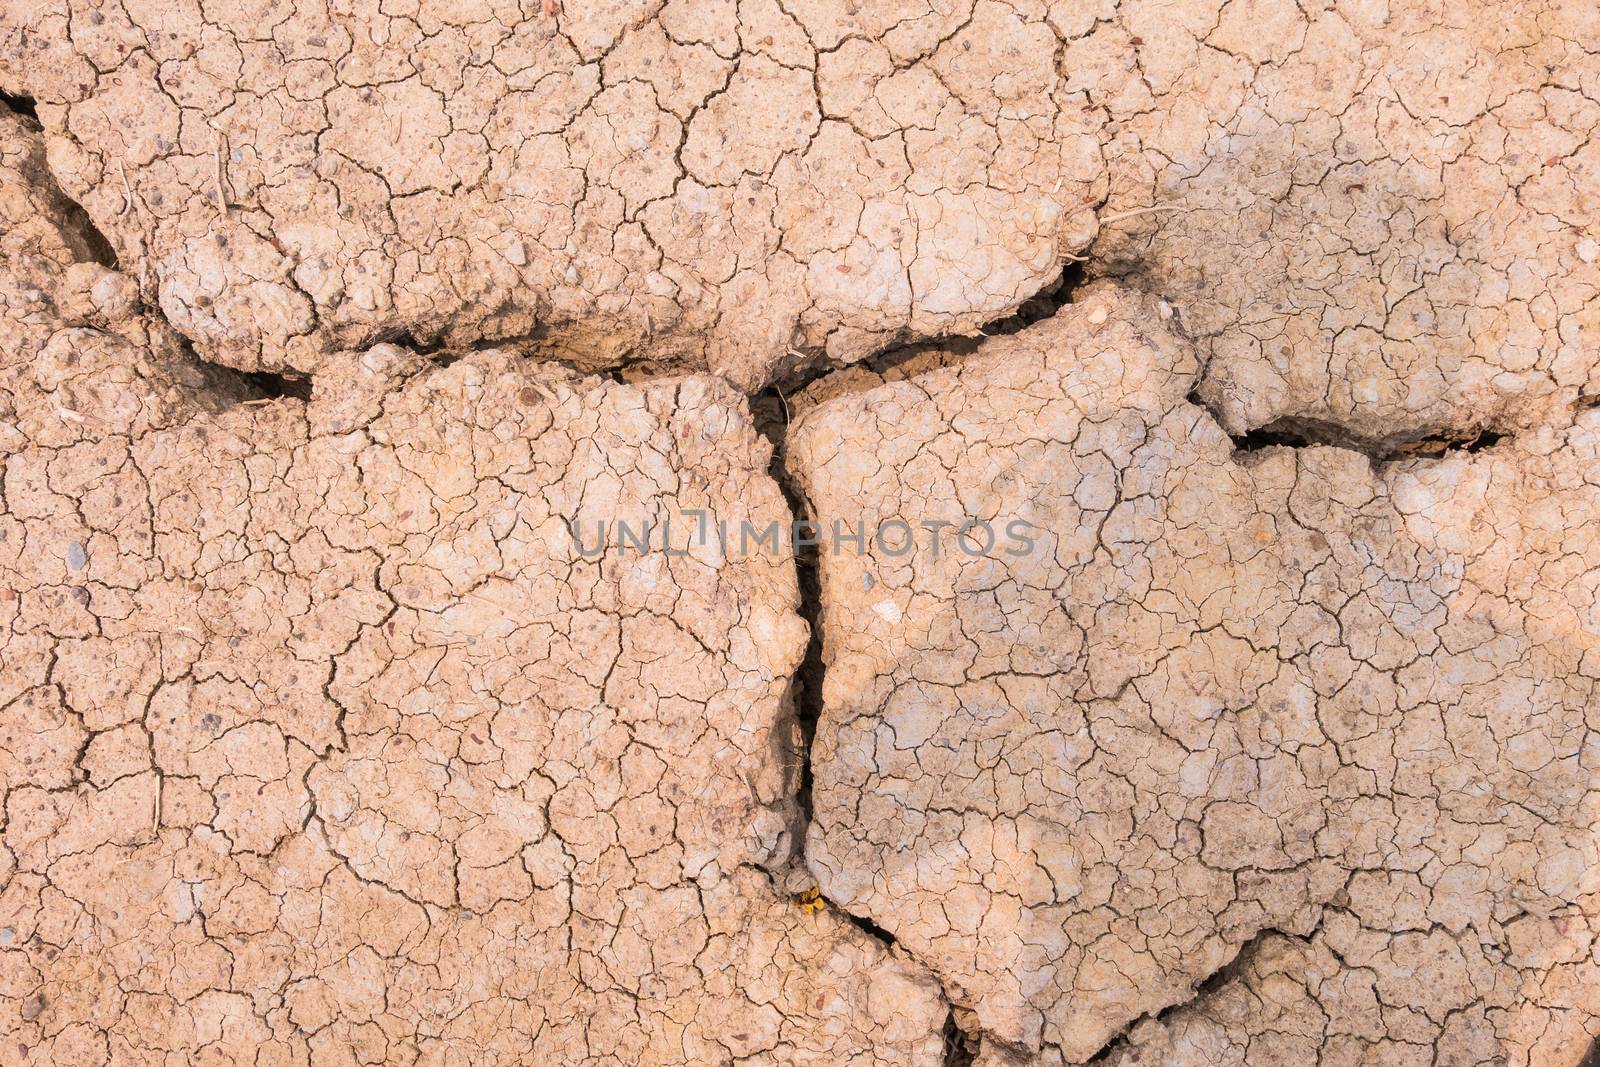 The Dry cracked earth texture